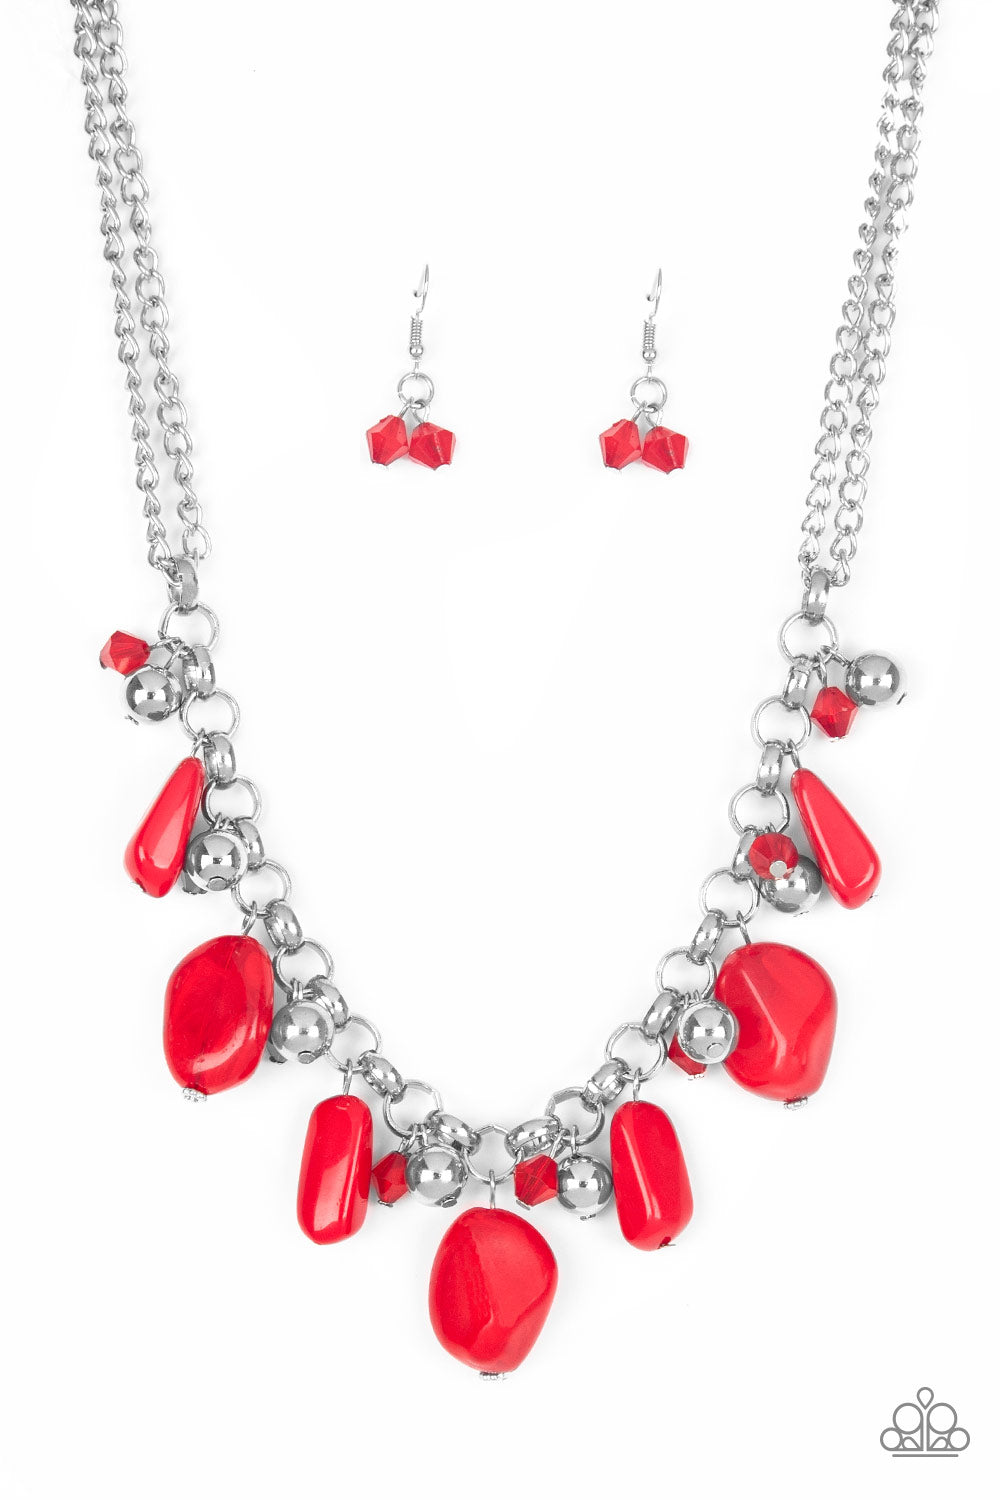 Grand Canyon Grotto - Red Necklace - Paparazzi Accessories - Jazzy Jewels With Lady J